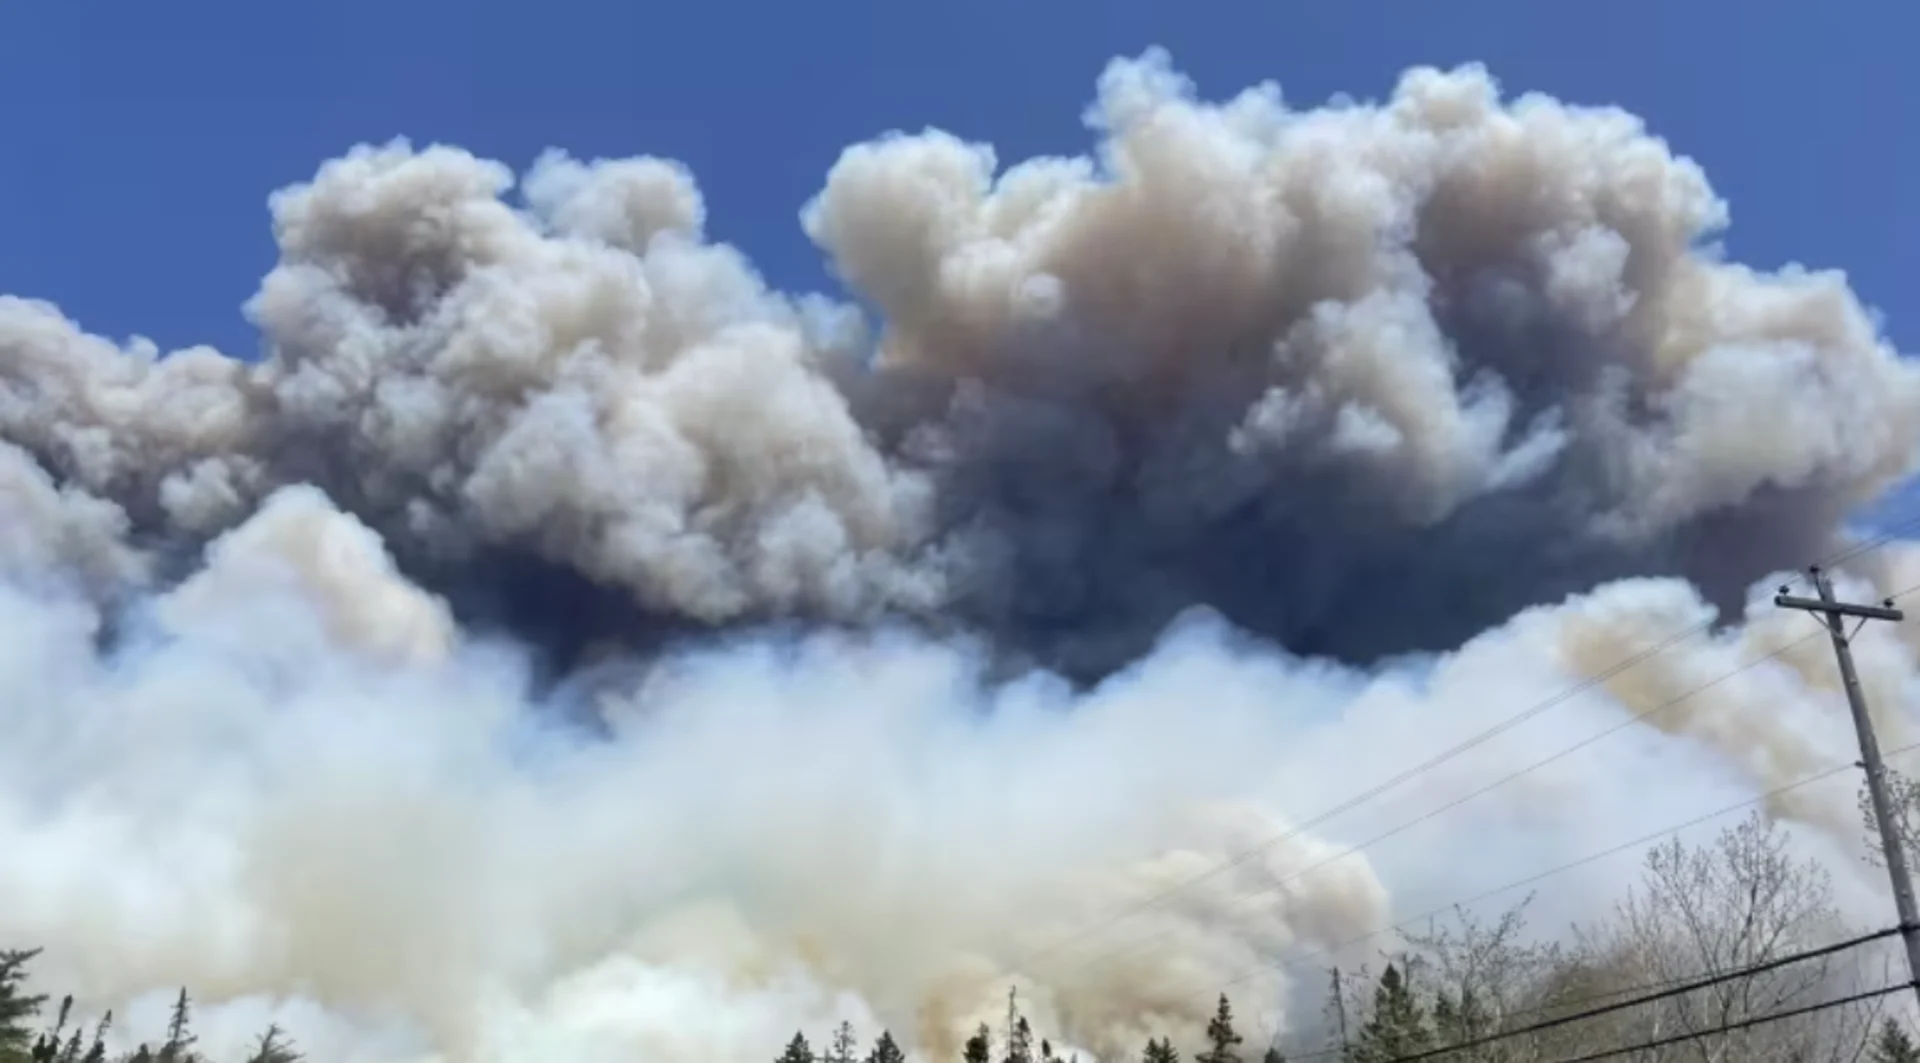 Shelburne County forest fire out of control, says province